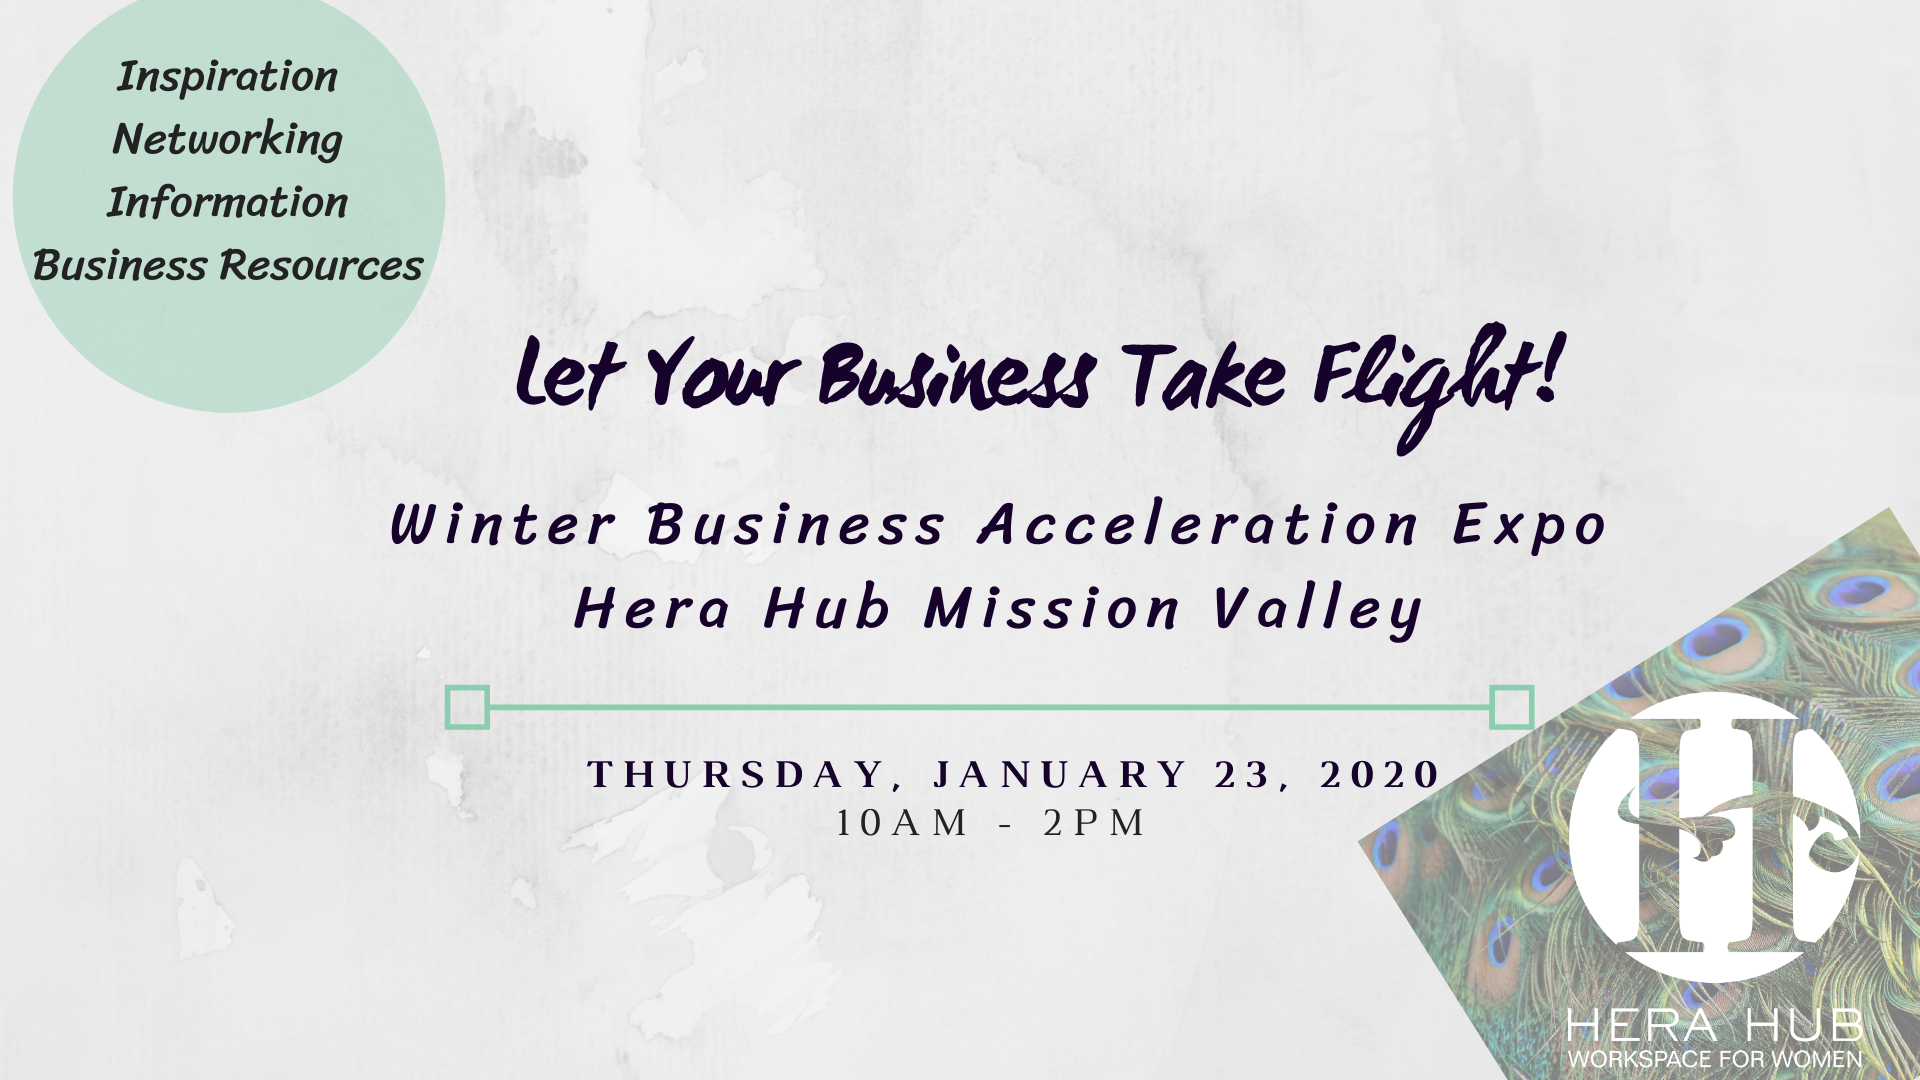 2020 Business Acceleration Expo at Hera Hub Mission Valley